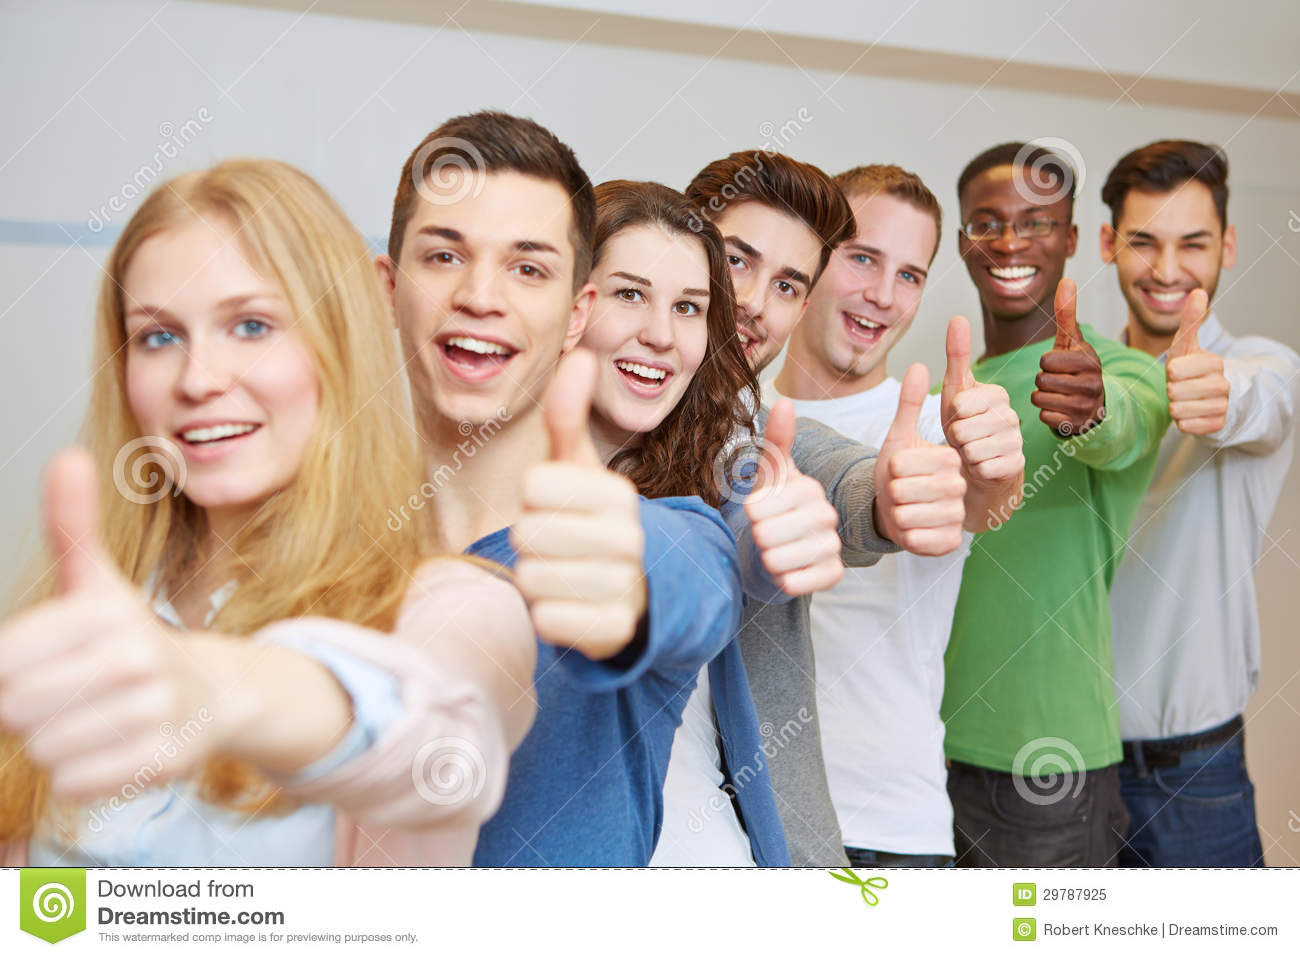 Cheering Students Holding Thumbs Up Royalty Free Stock Photo   Image